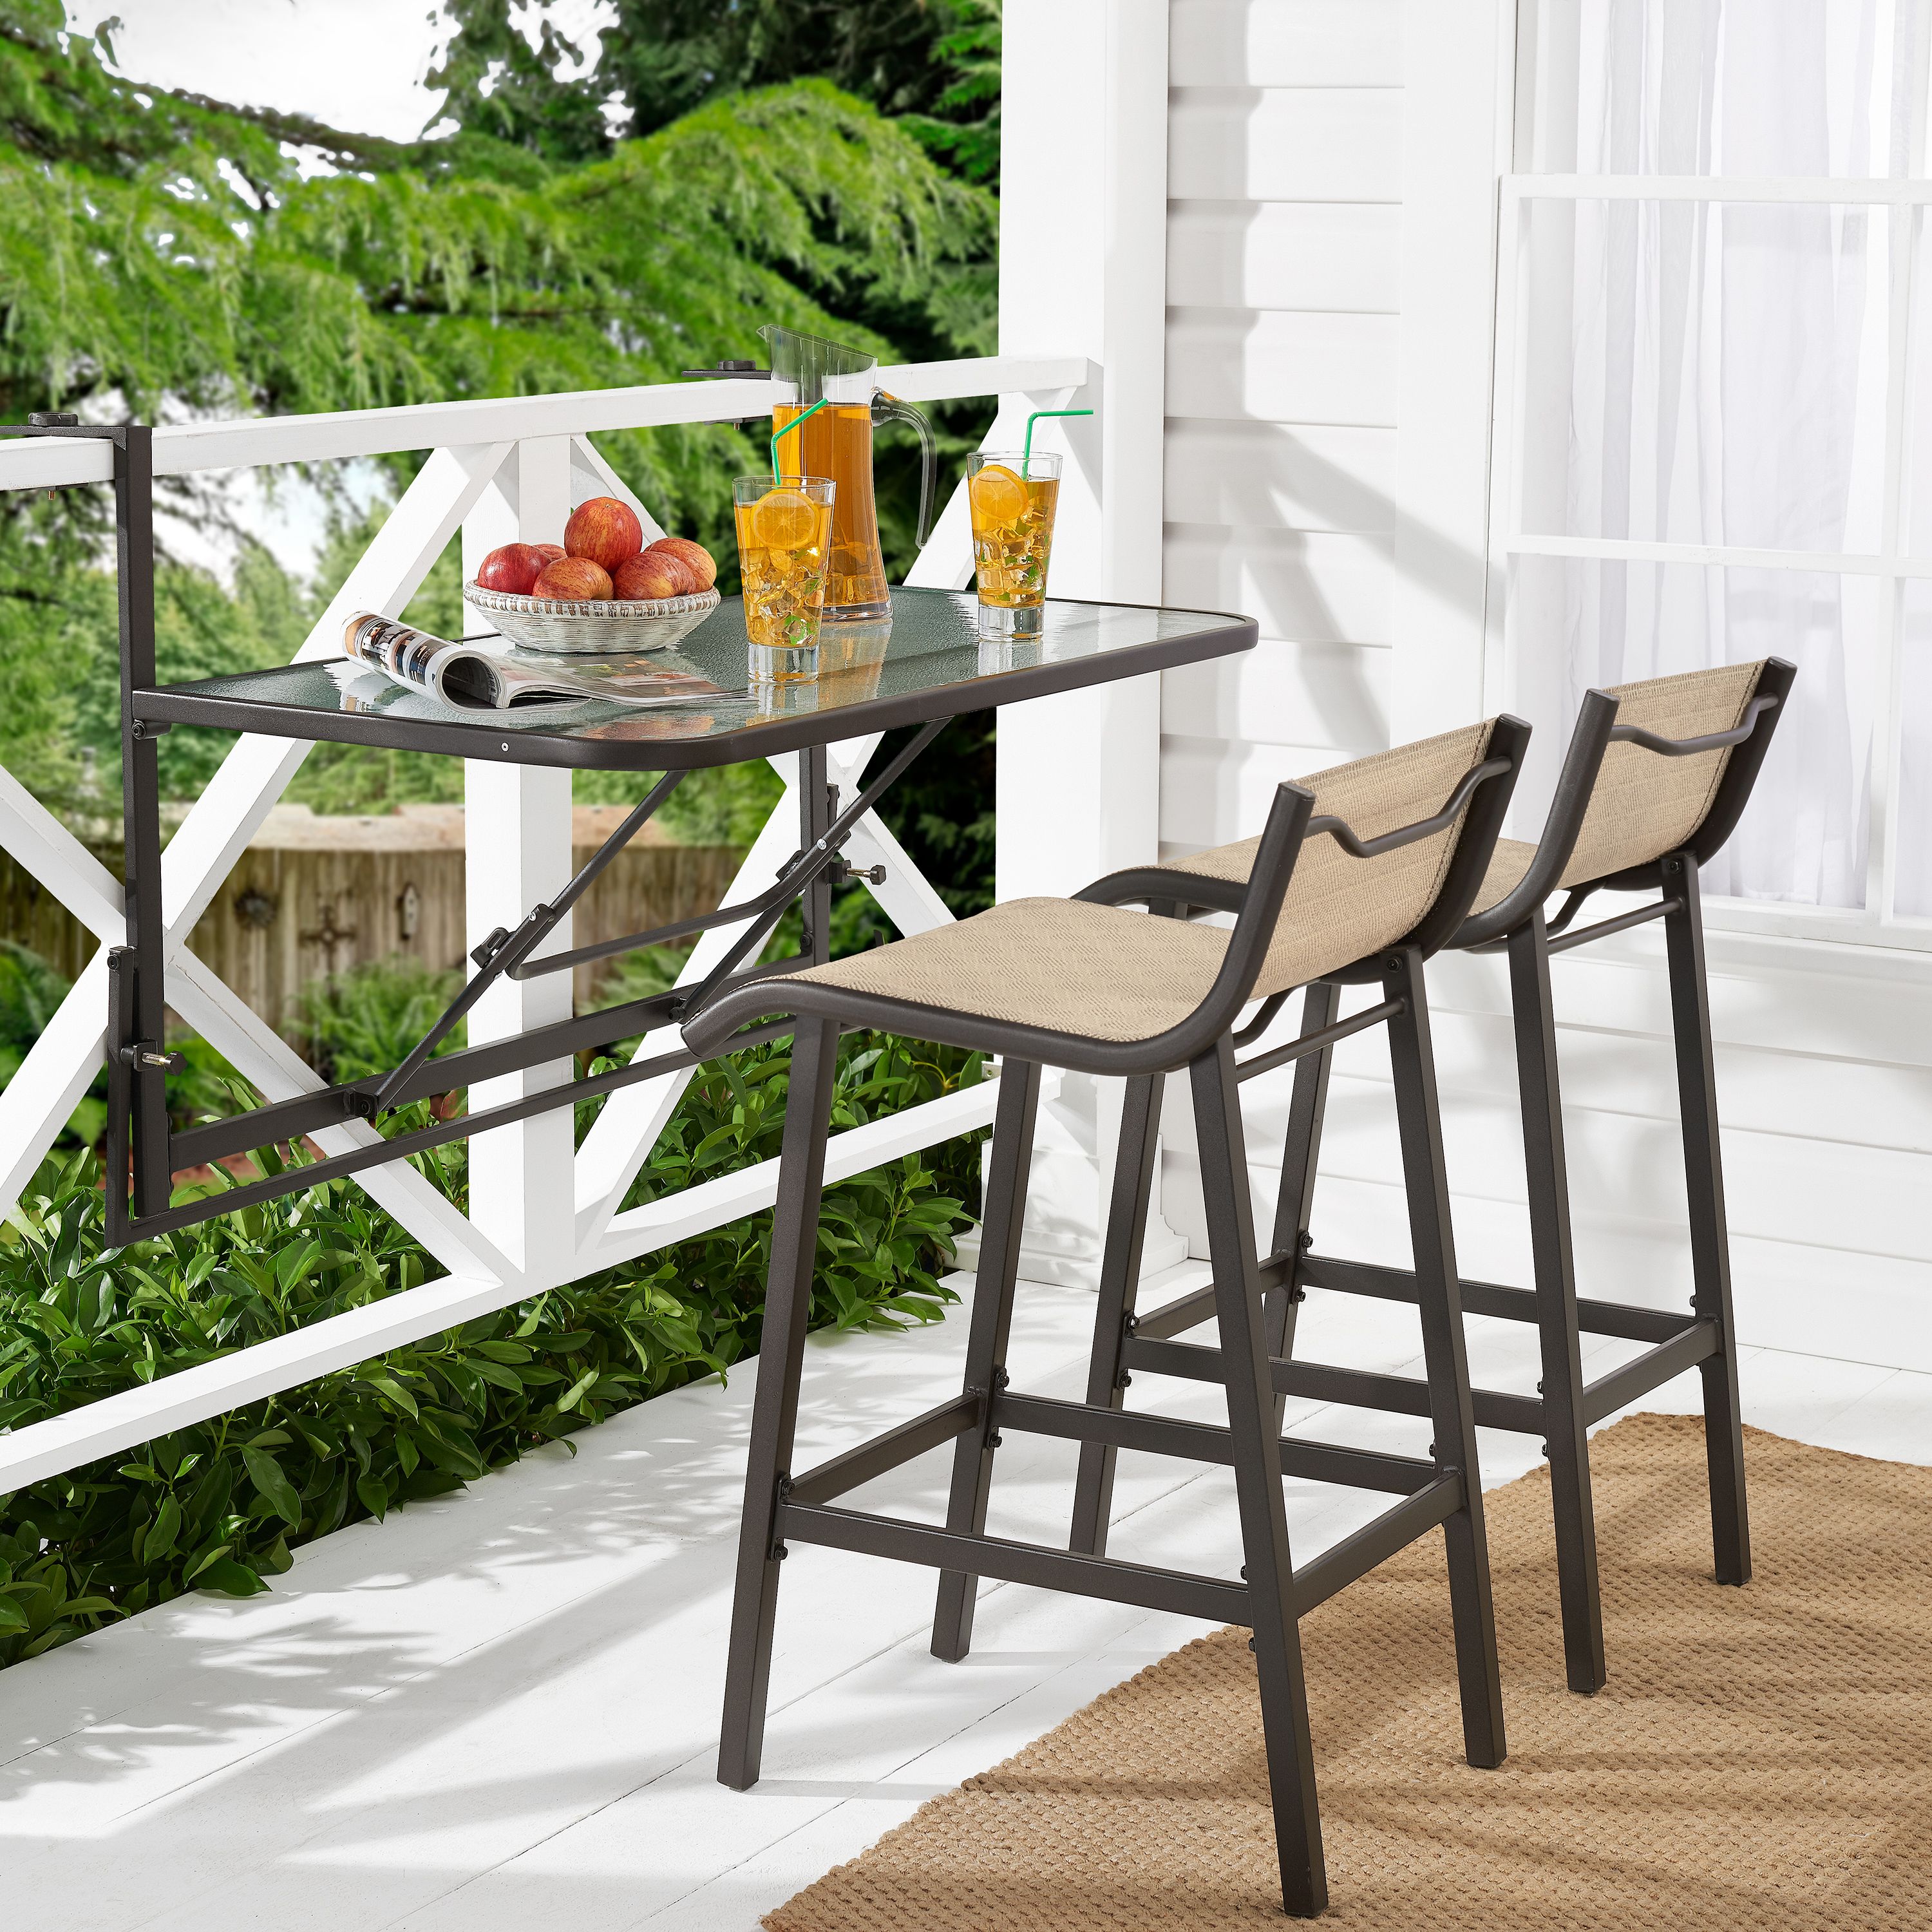 10 Best Balcony Furniture Sets For Small Outdoor Spaces Cheap Outdoor Bistro Sets